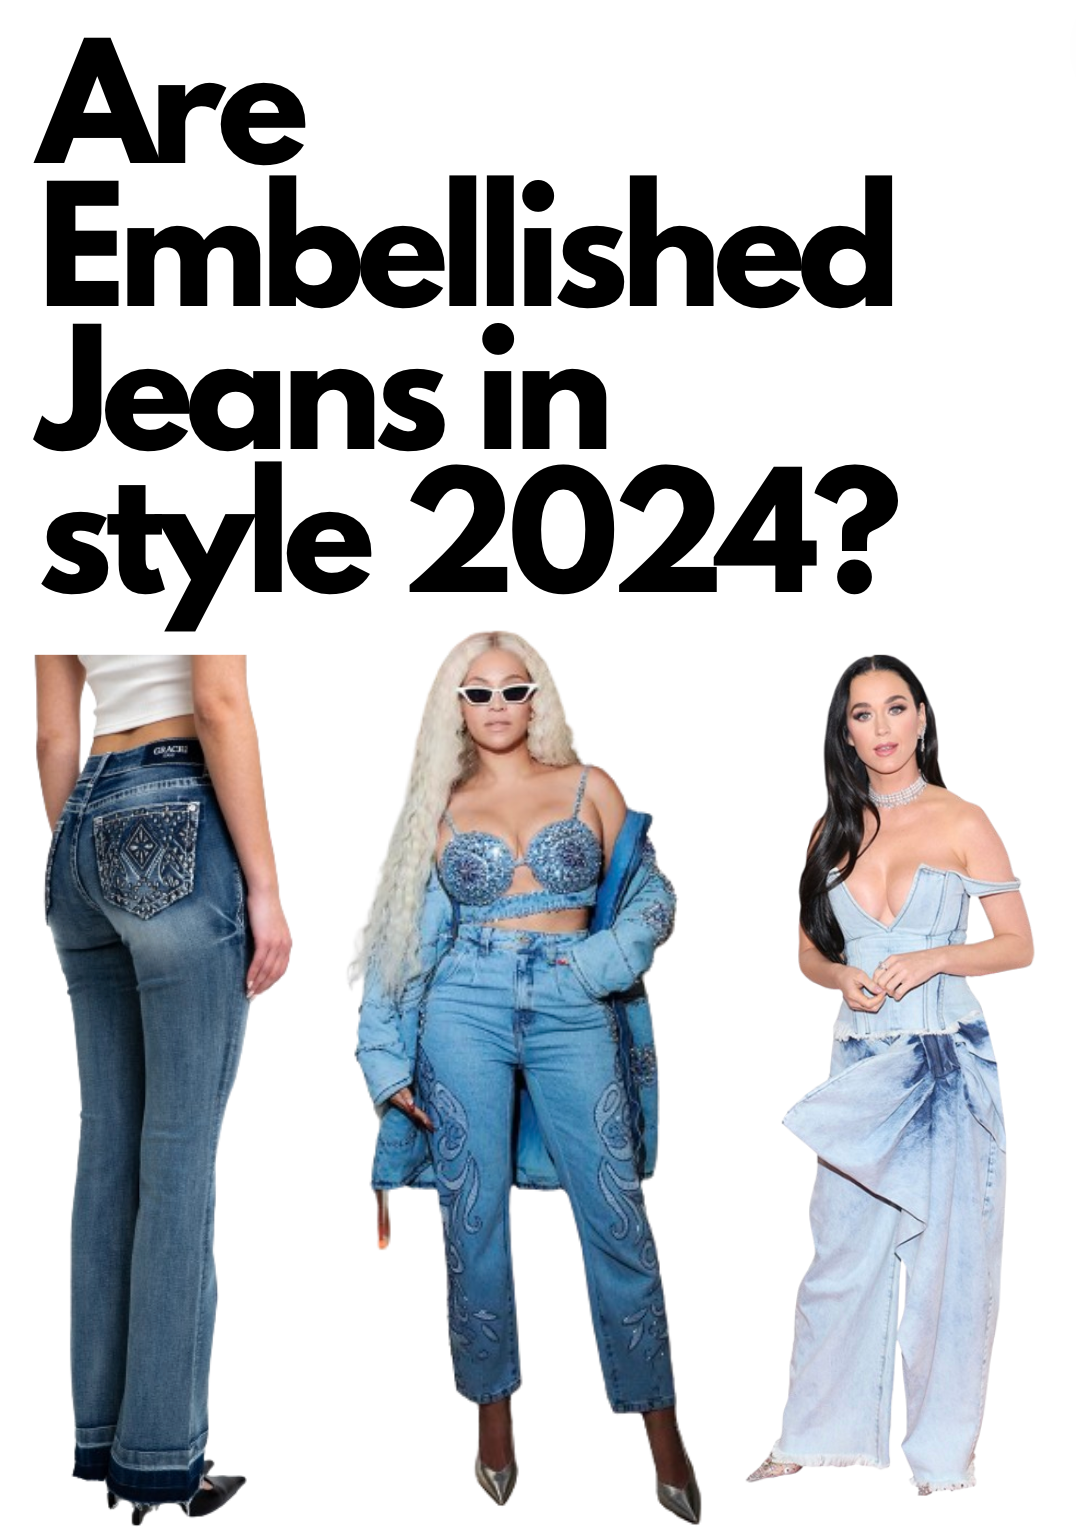 are-embellished-jeans-in-style-2024?